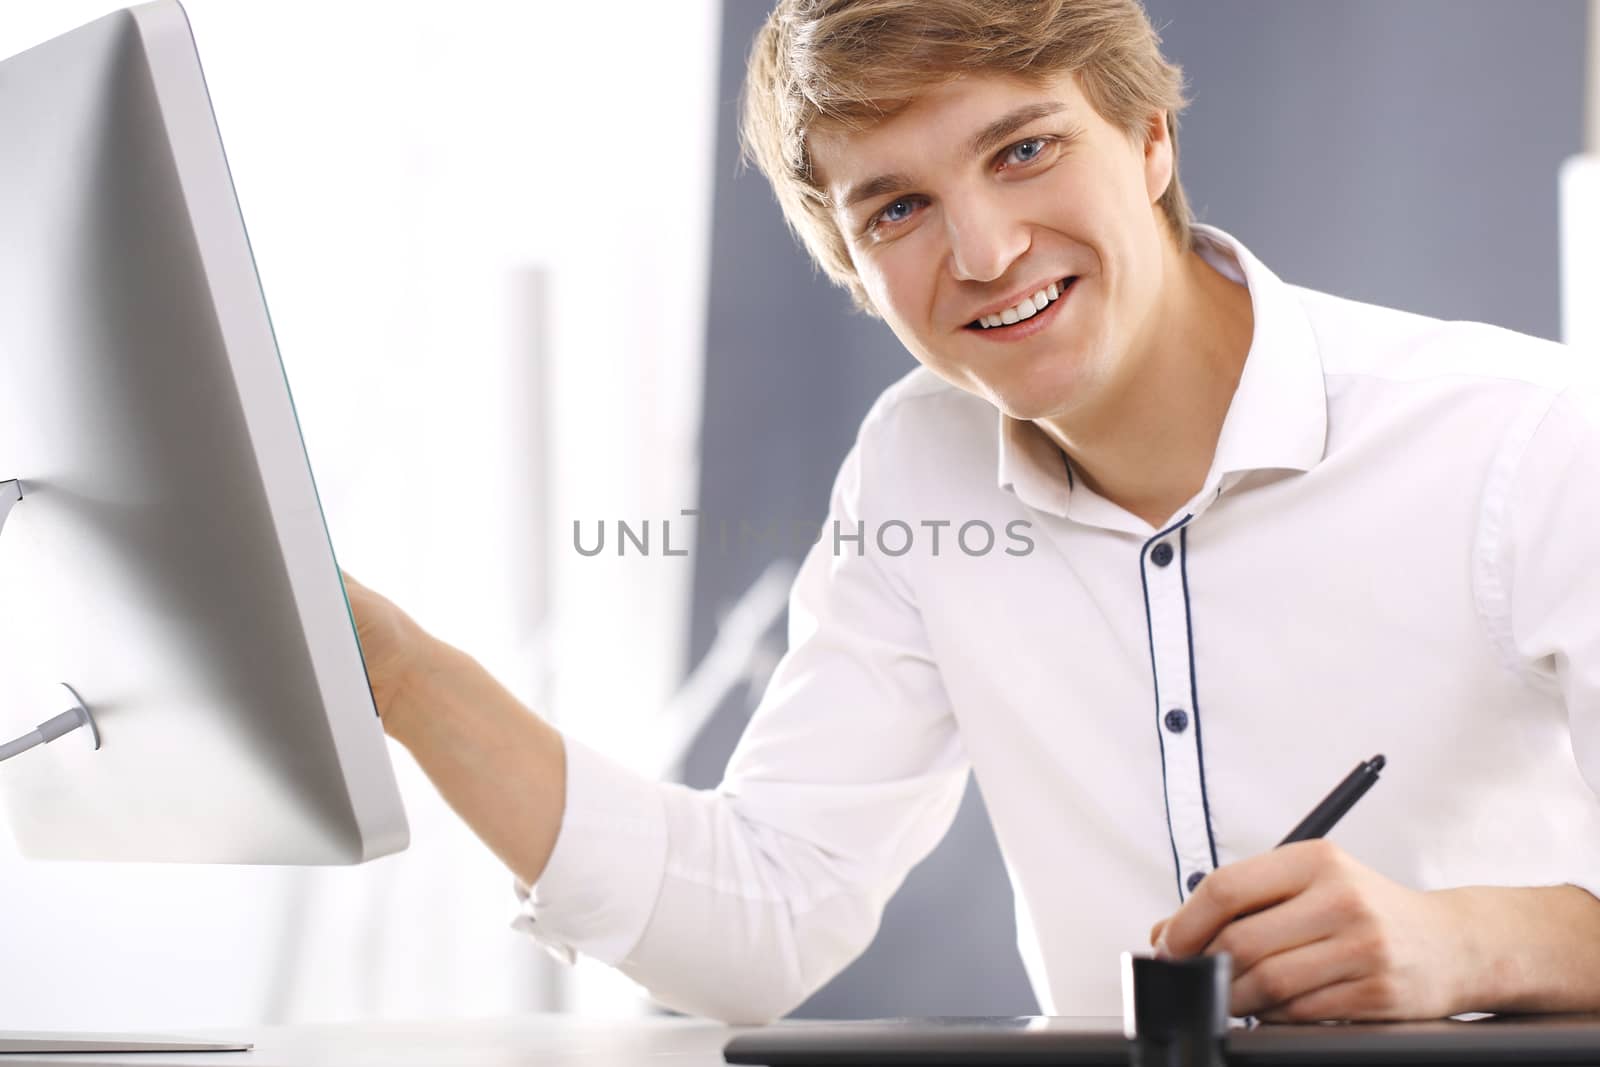 Portrait of handsome Caucasian man in a white shirt sitting in an office behind a desk